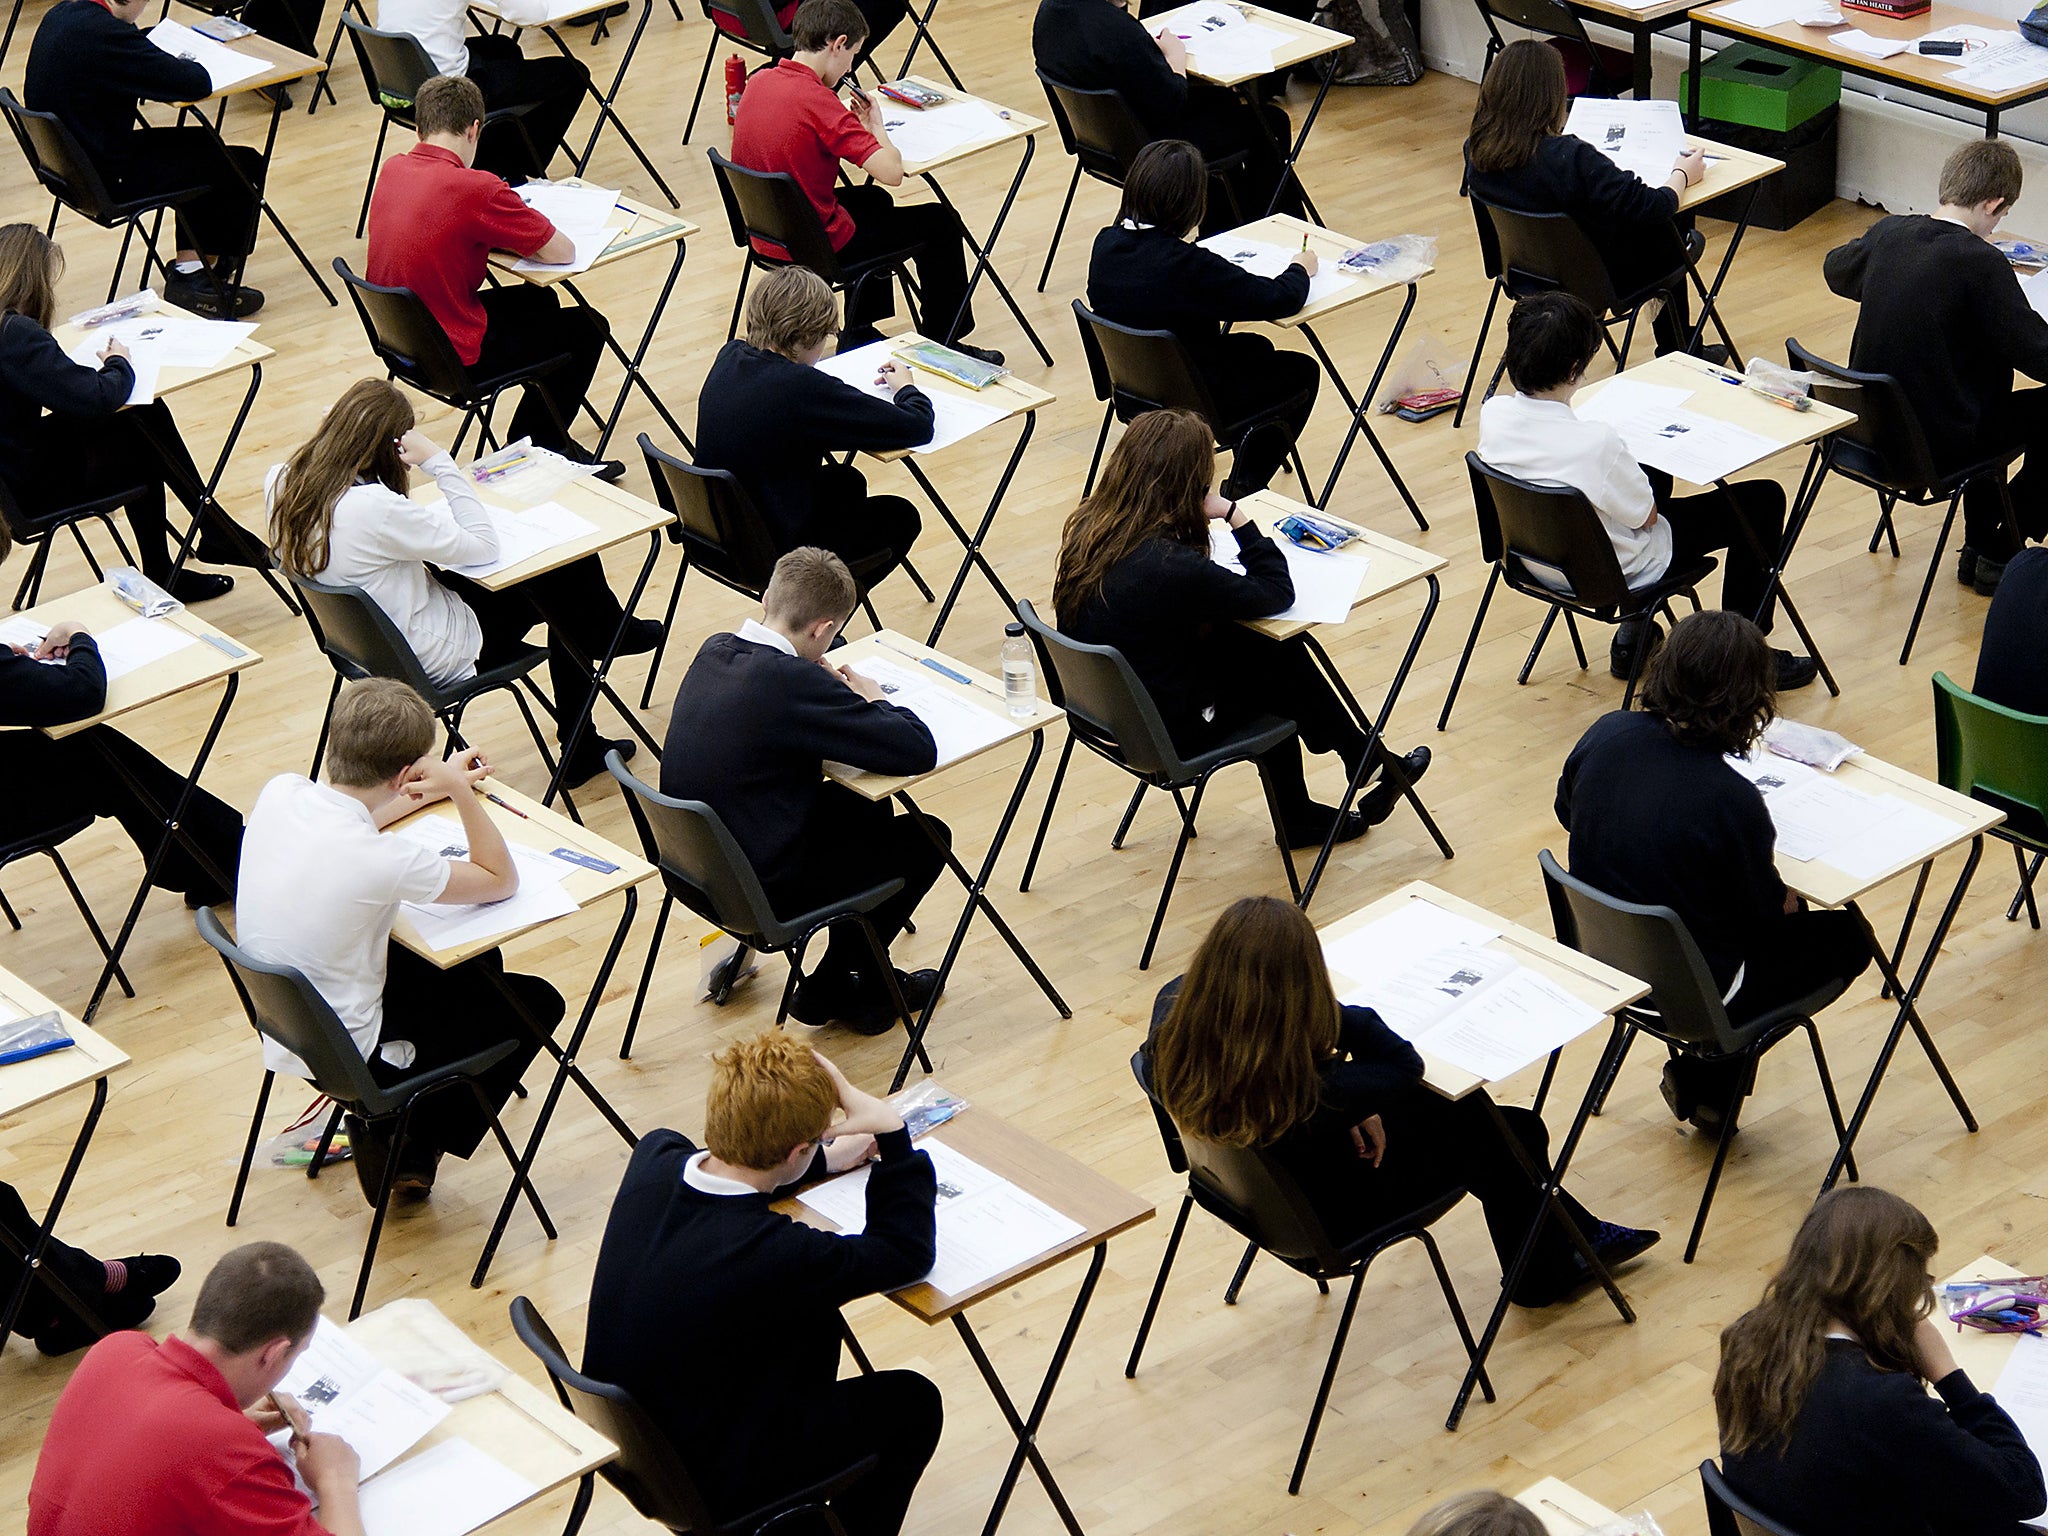 Schools in Scotland, Canada and Australia have agreed to take part in the new assessments